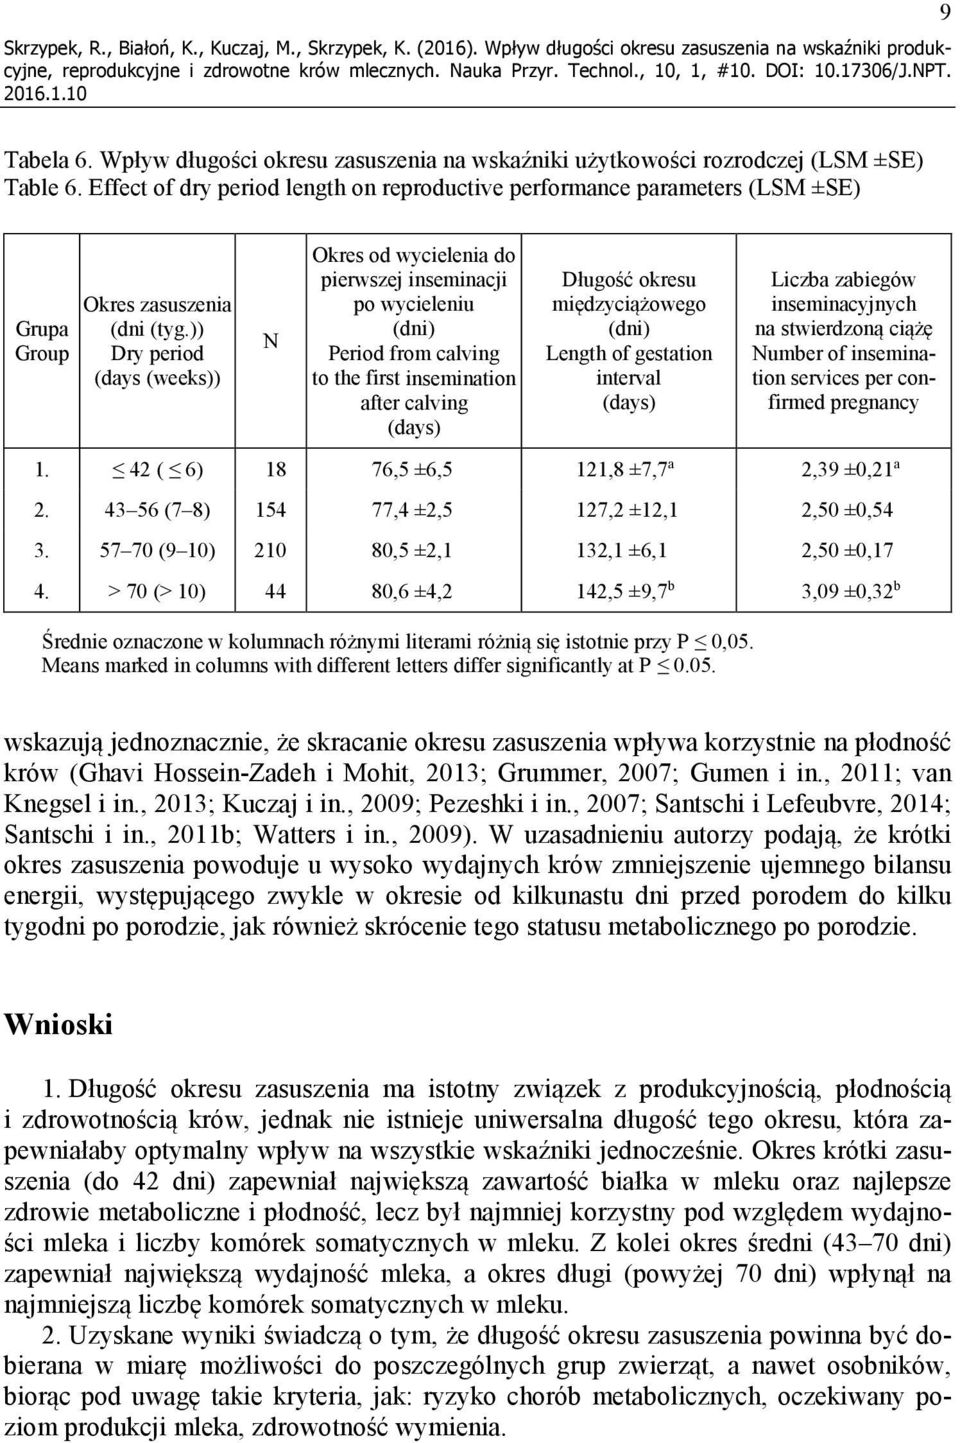 Effect of dry period length on reproductive performance parameters (LSM ±SE) Grupa Group Okres zasuszenia (dni (tyg.